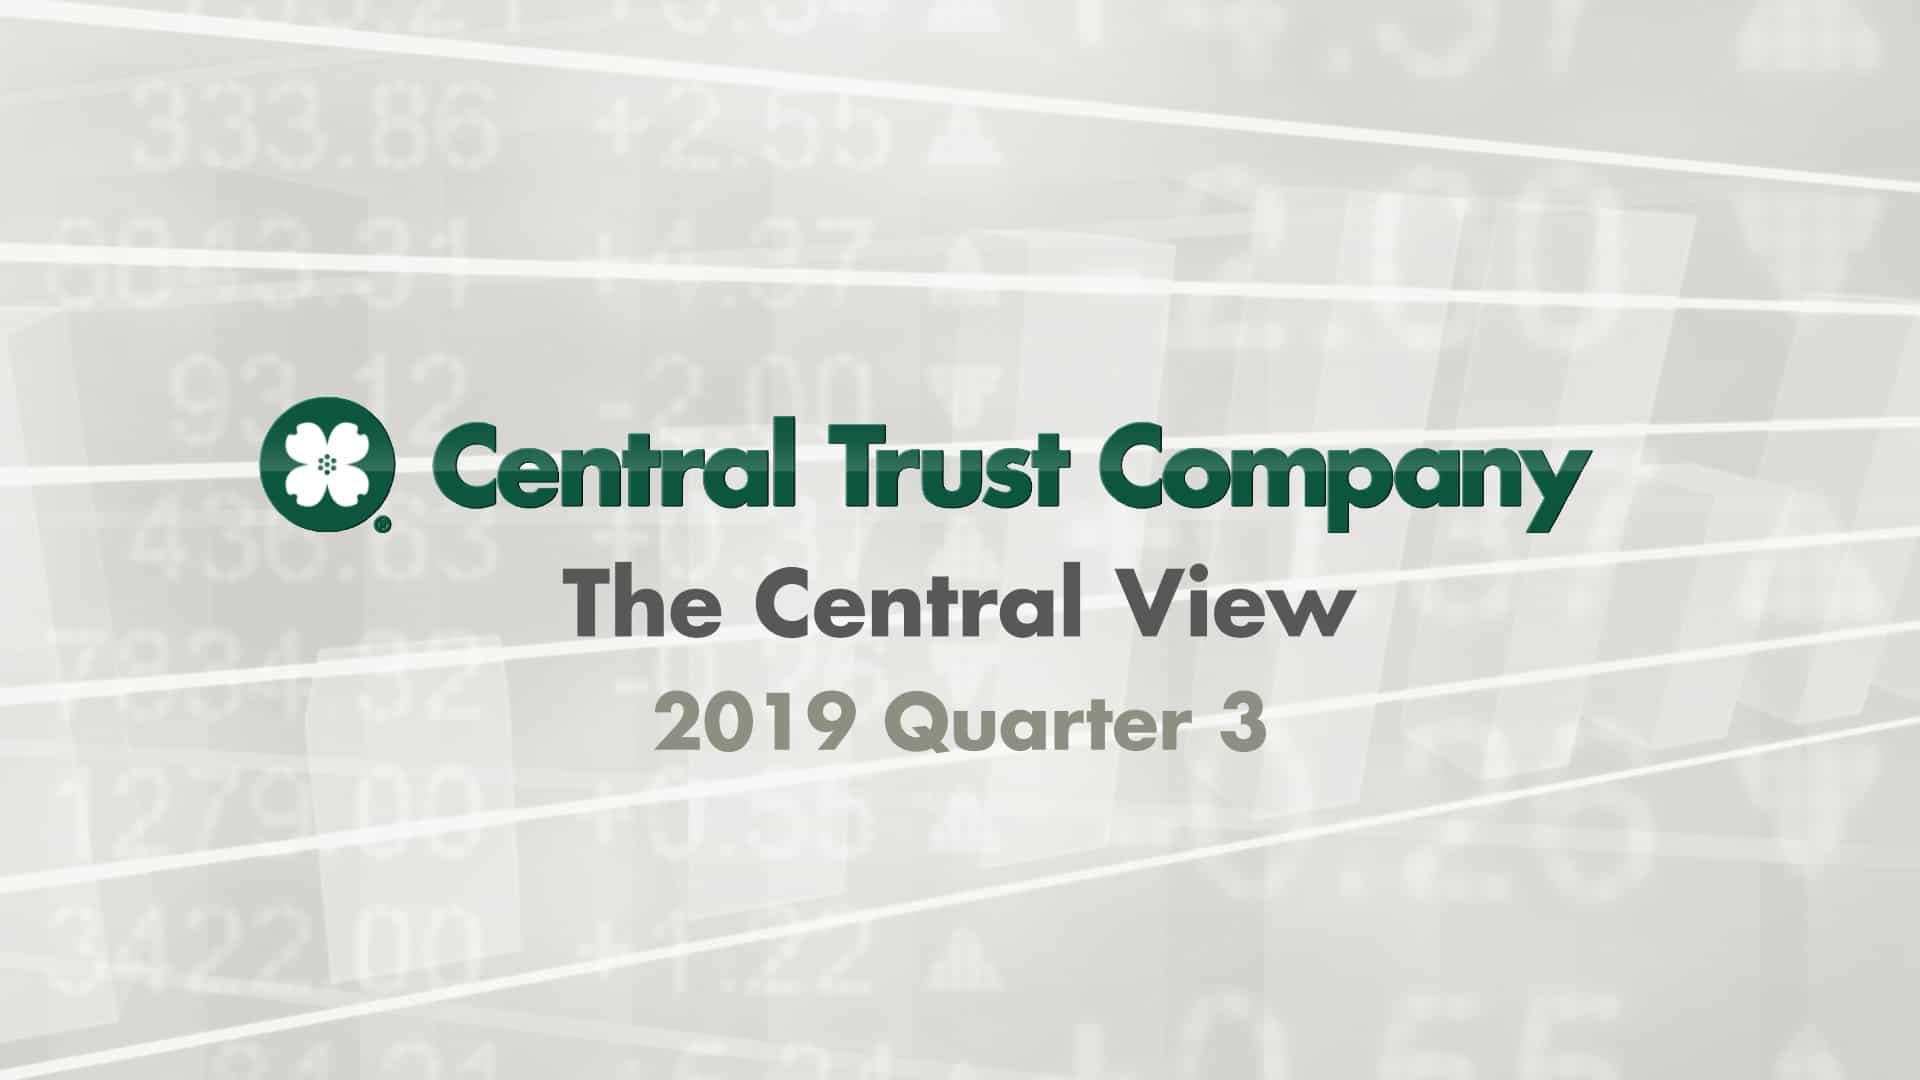 The Central View Q3 2019